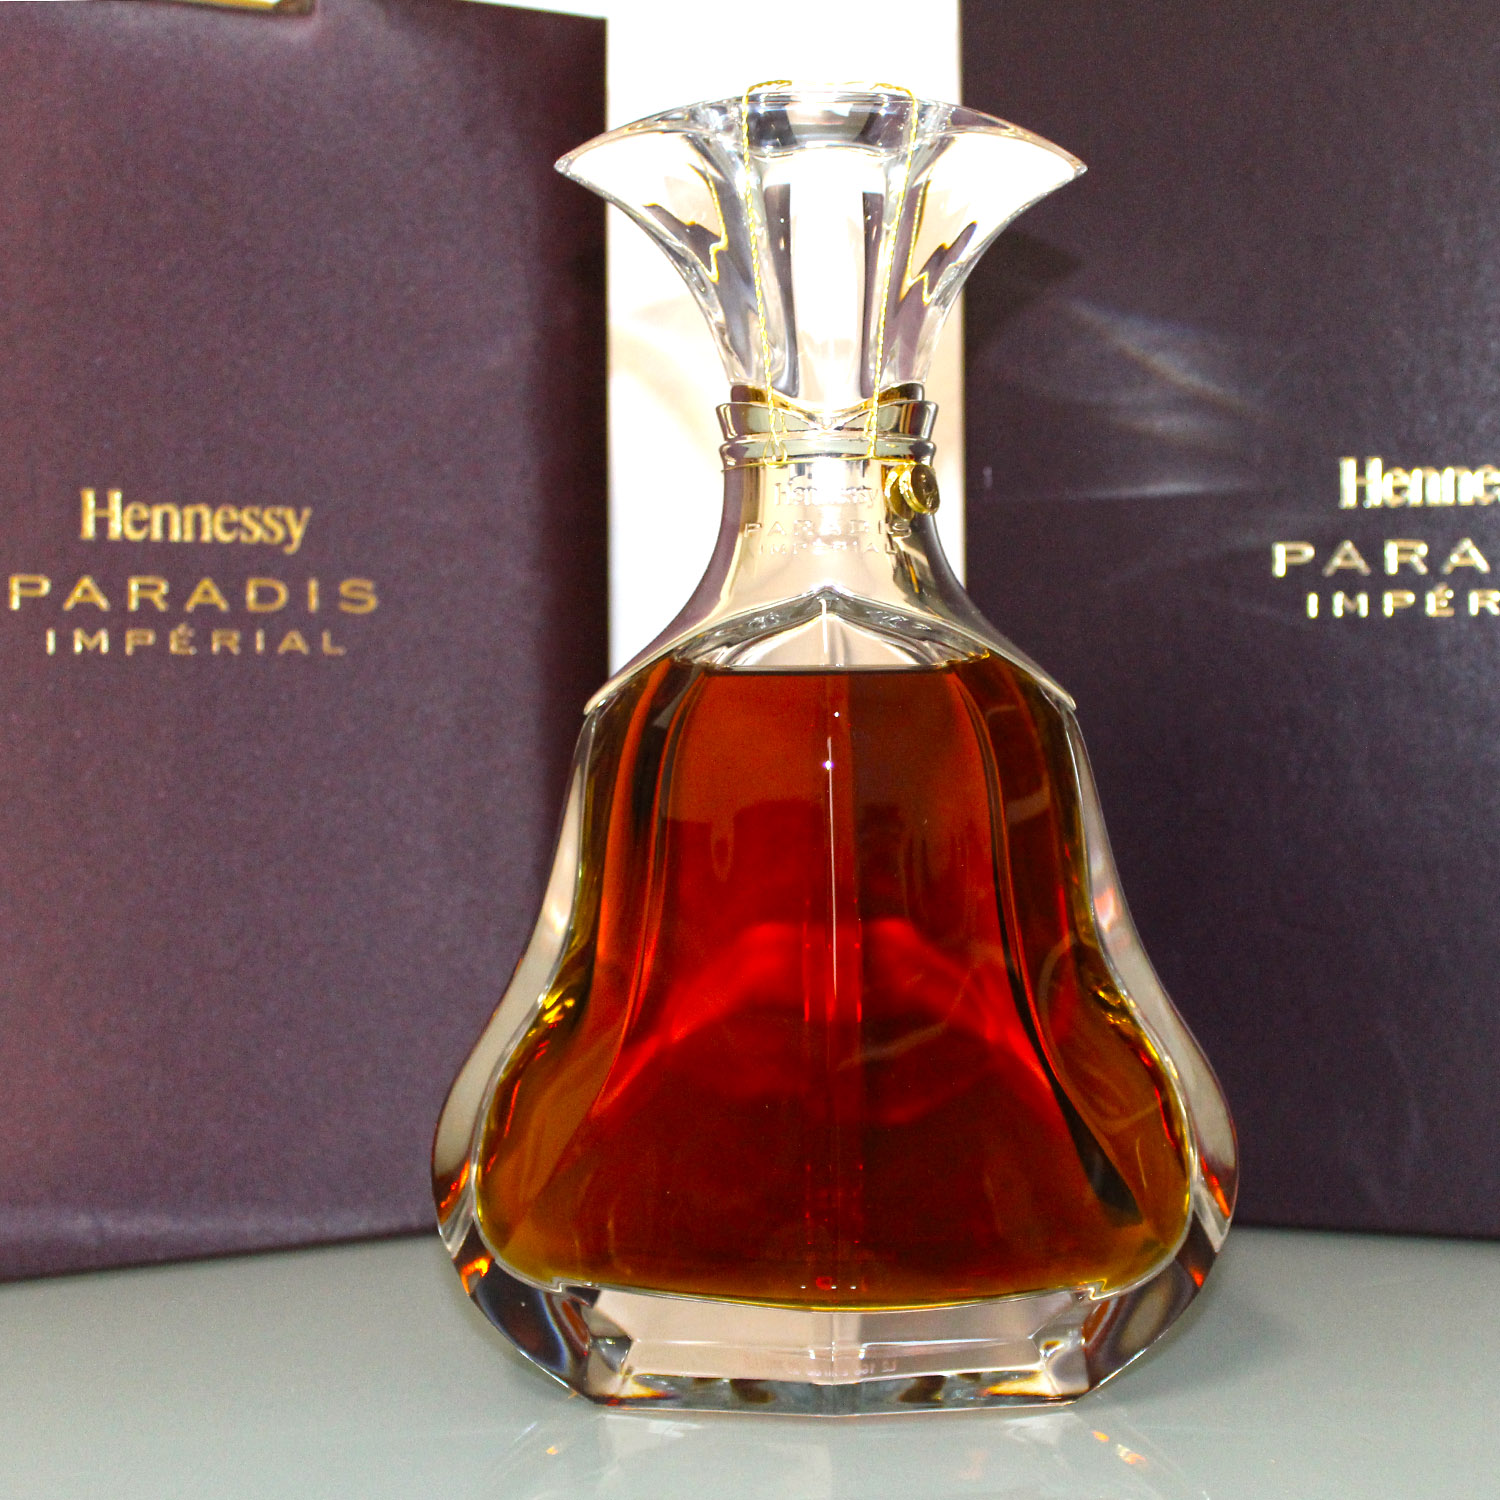 Hennessy Paradis Imperial Cognac 2